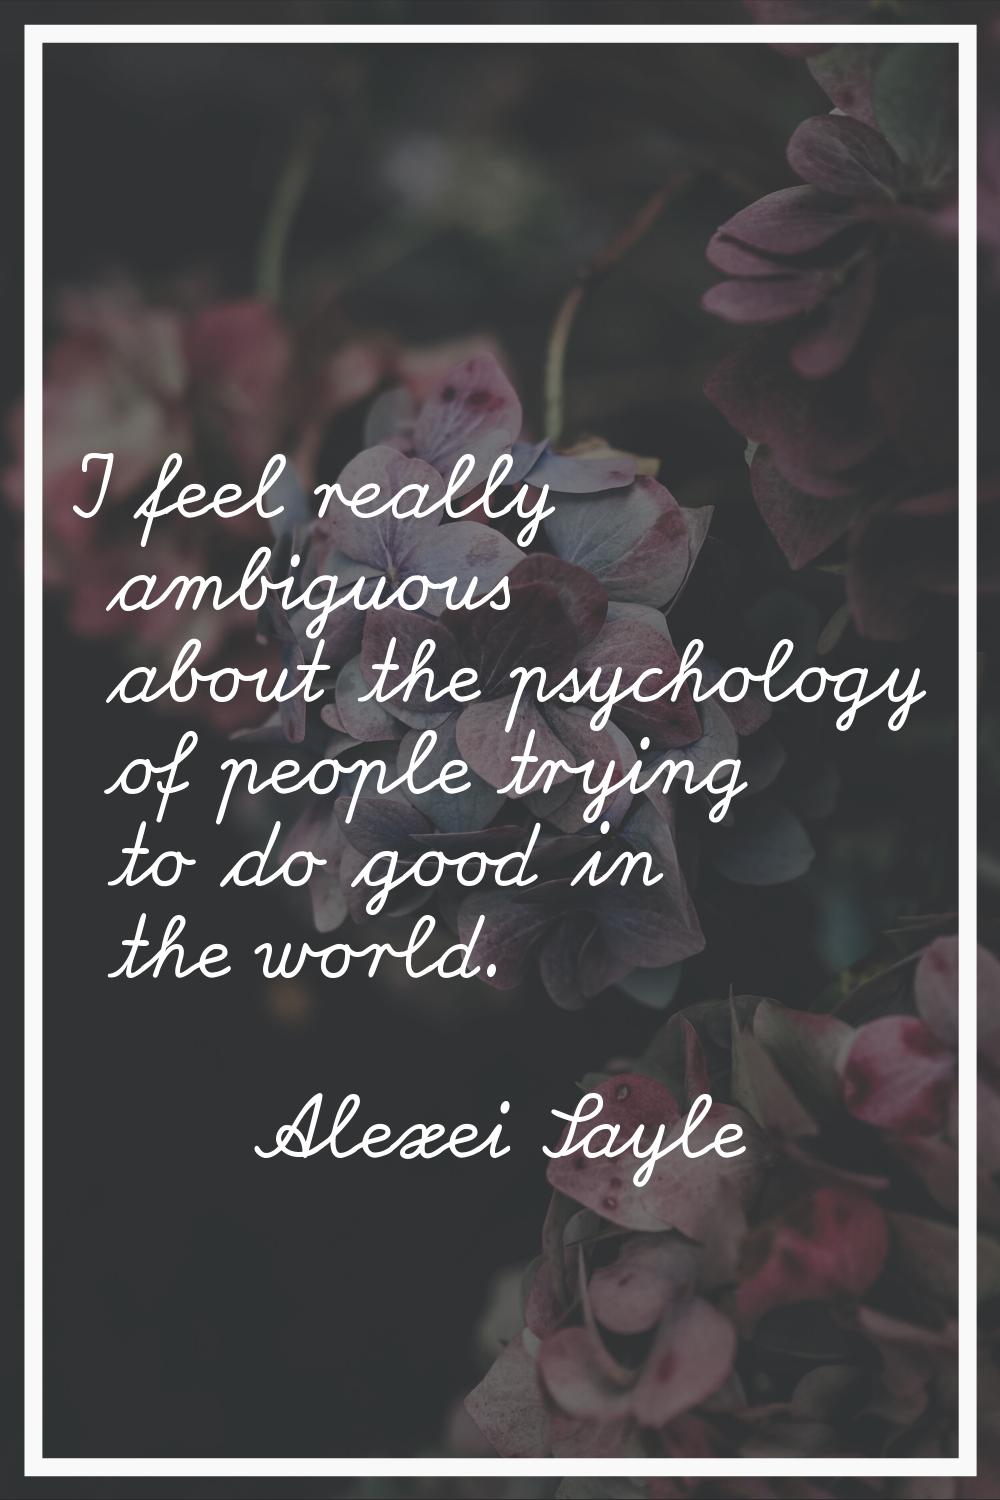 I feel really ambiguous about the psychology of people trying to do good in the world.